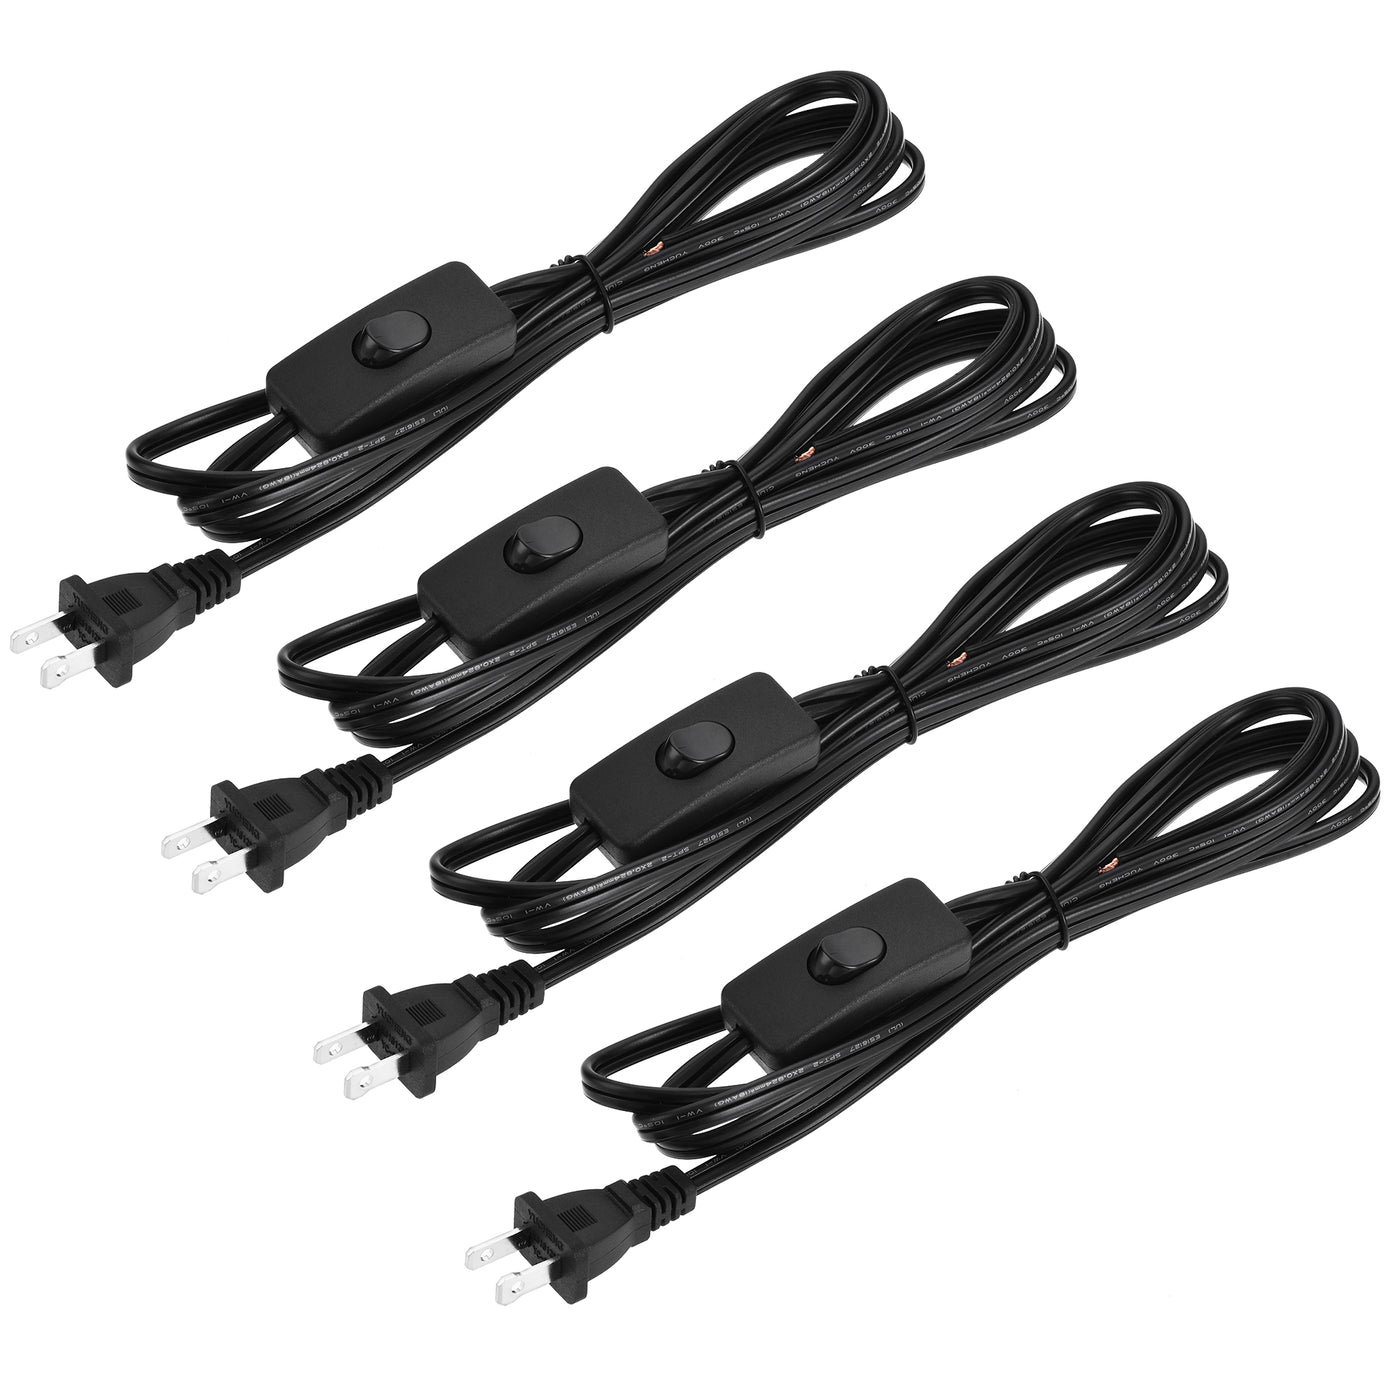 uxcell Uxcell US Plug Lamp Cord with Switch, SPT-2 18AWG Power Wire 1.8M Black, UL Listed 4Pcs